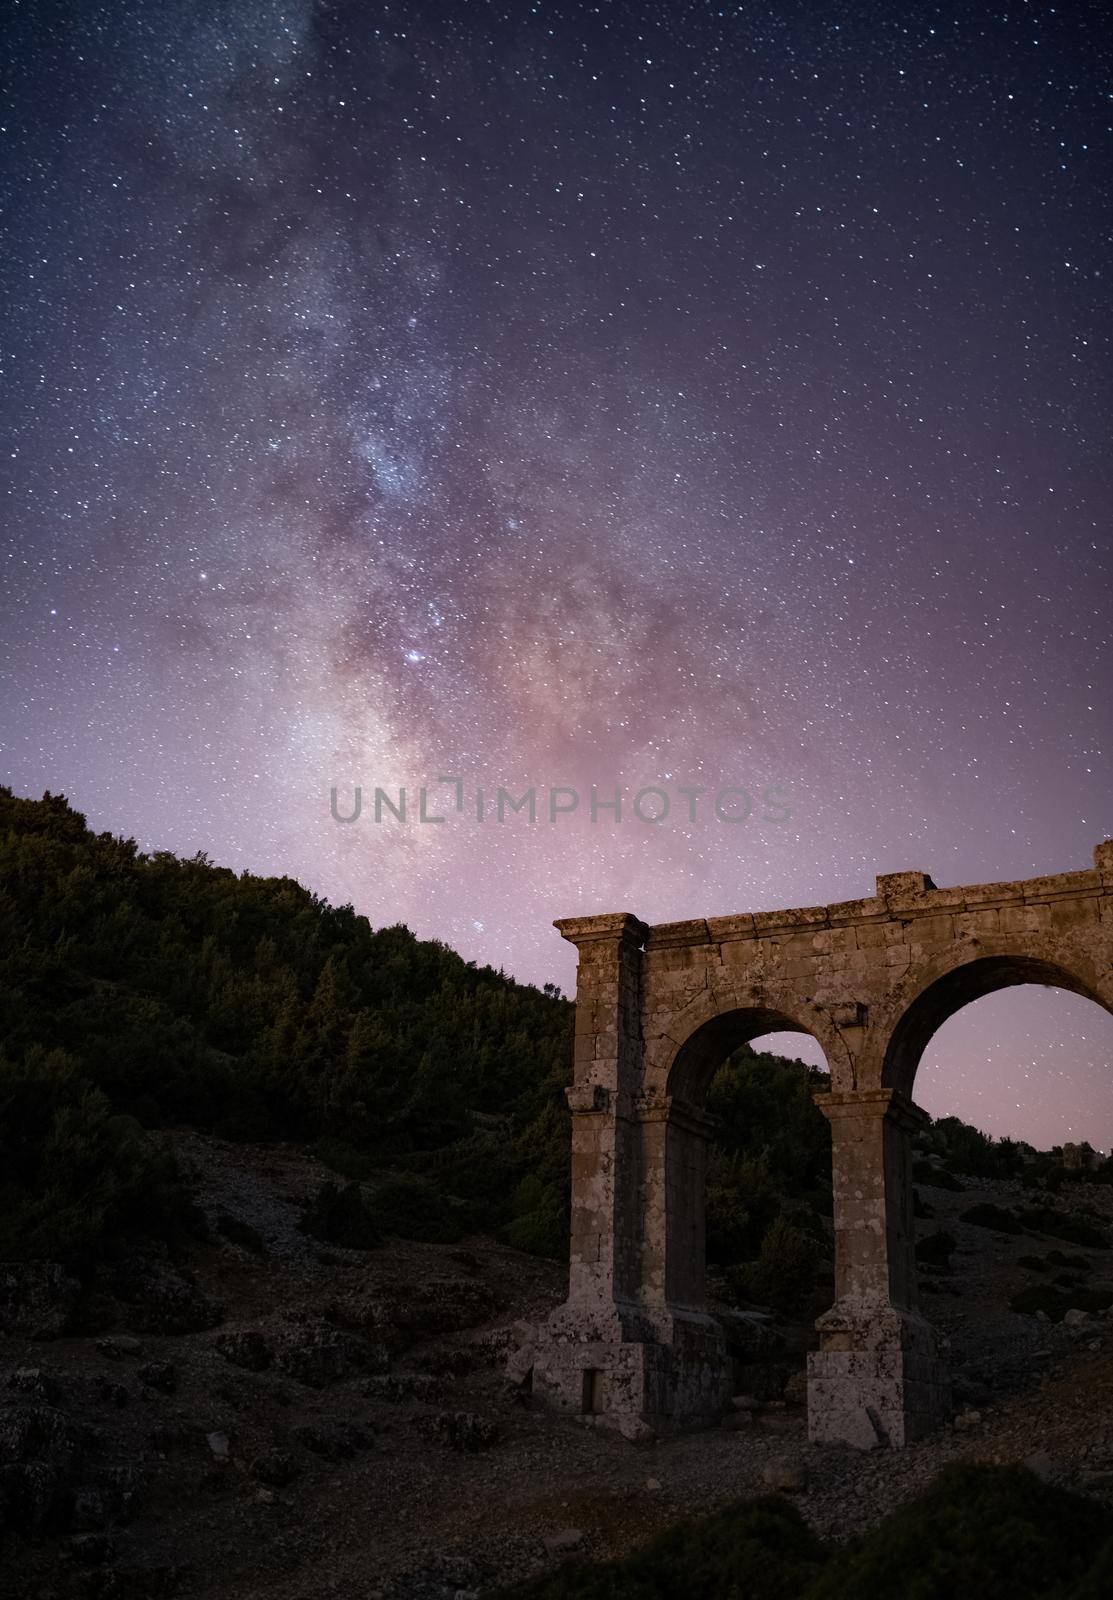 The ancient city of Ariassos, the city gate in a night when the Milky Way is visible